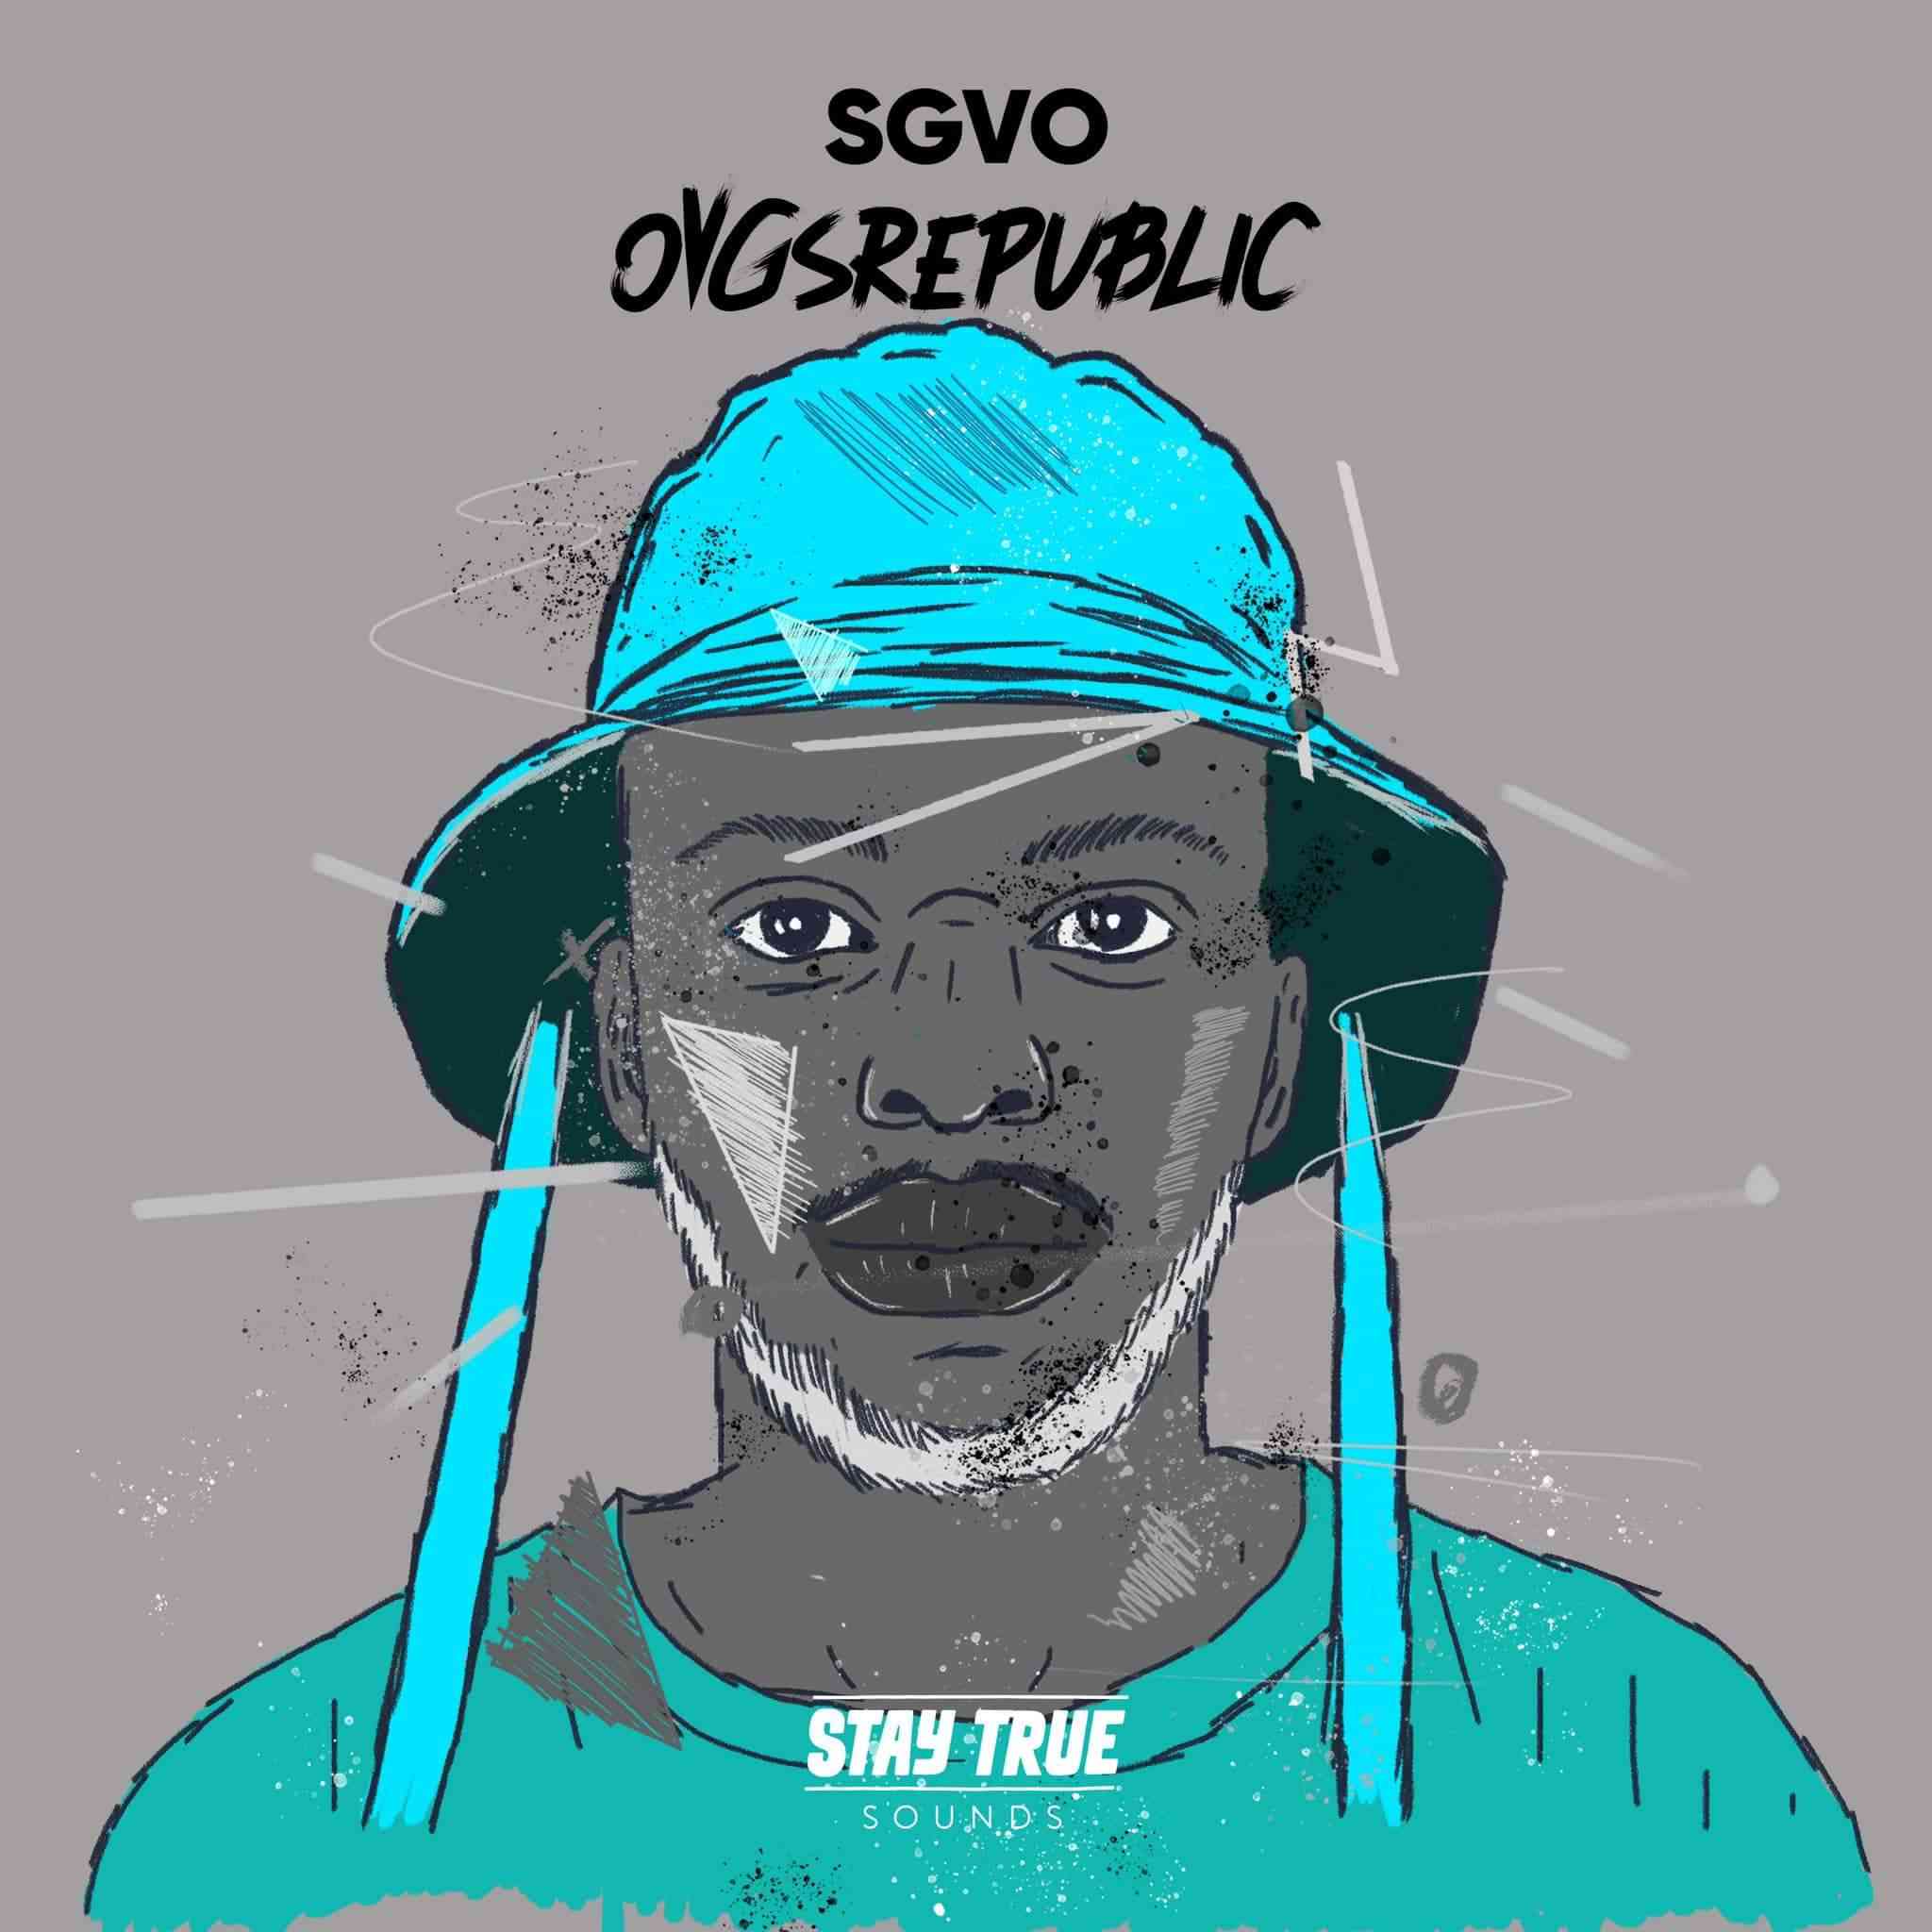 SGVO Ready For A Comeback With OVGSREPUBLIC (Pre-order Now)